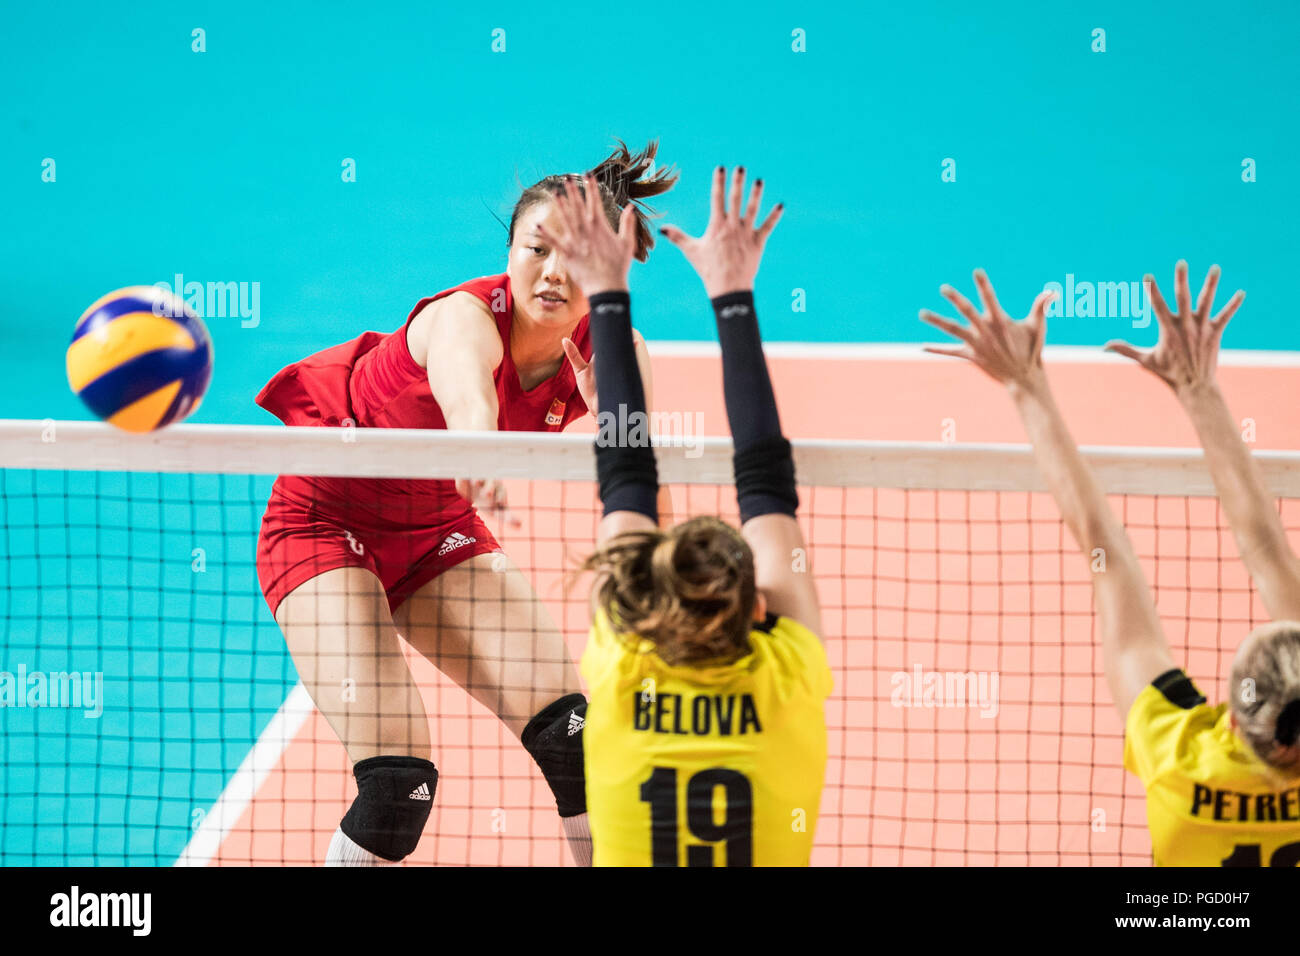 180825)? JAKARTA, Aug. 25, 2018 (Xinhua) -- Gong Xiangyu (L) of China  competes during women's volleyball tournament Pool B match between China  and Kazakhstan at the 18th Asian Games in Jakarta, Indonesia,